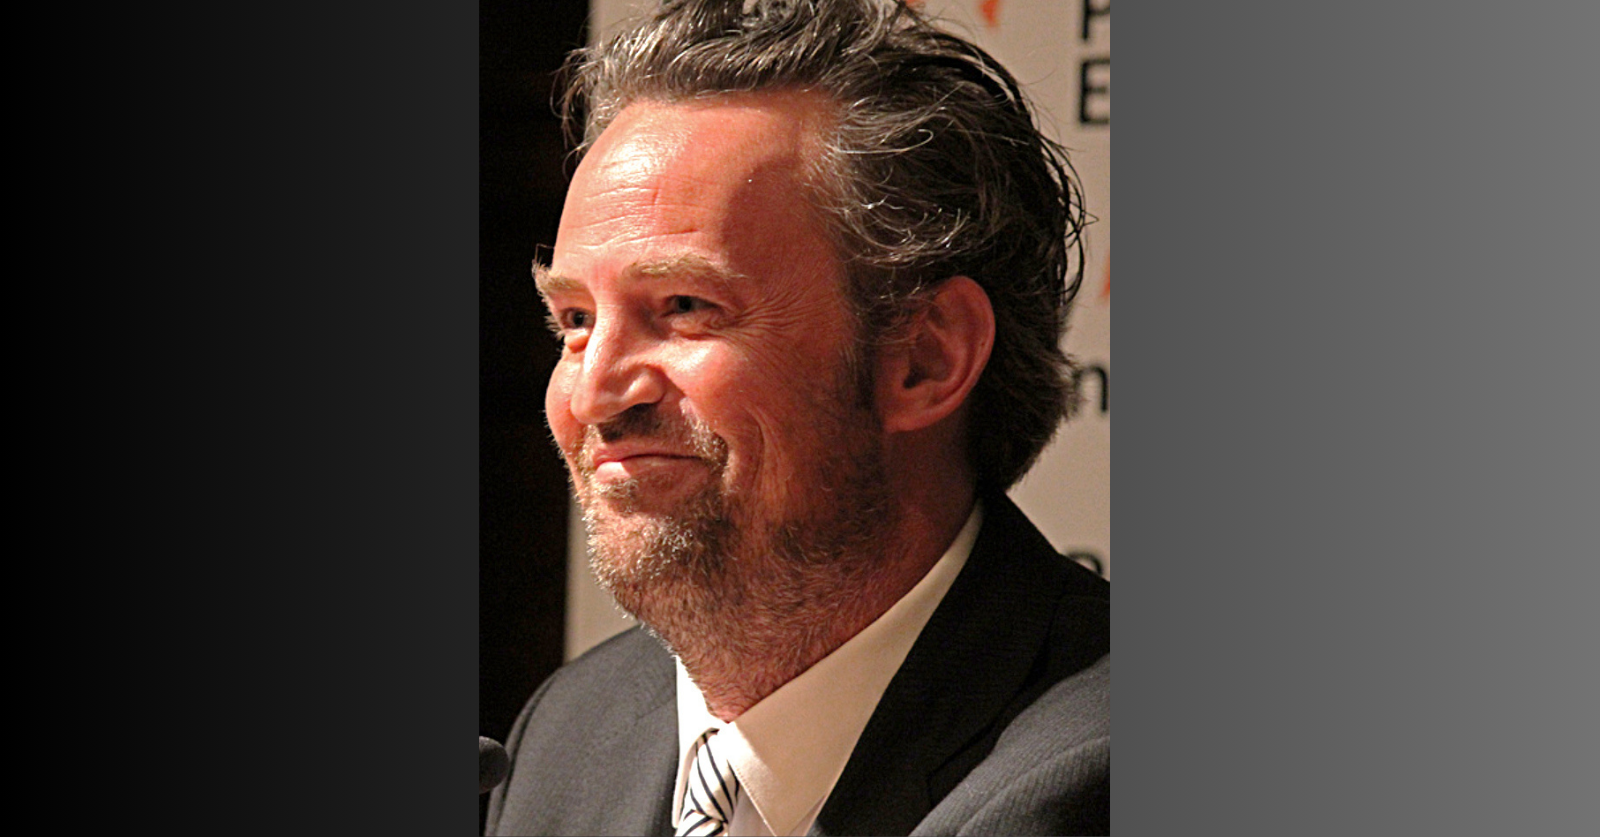 ‘Friends’ star Matthew Perry remembered for raising awareness about substance use disorder